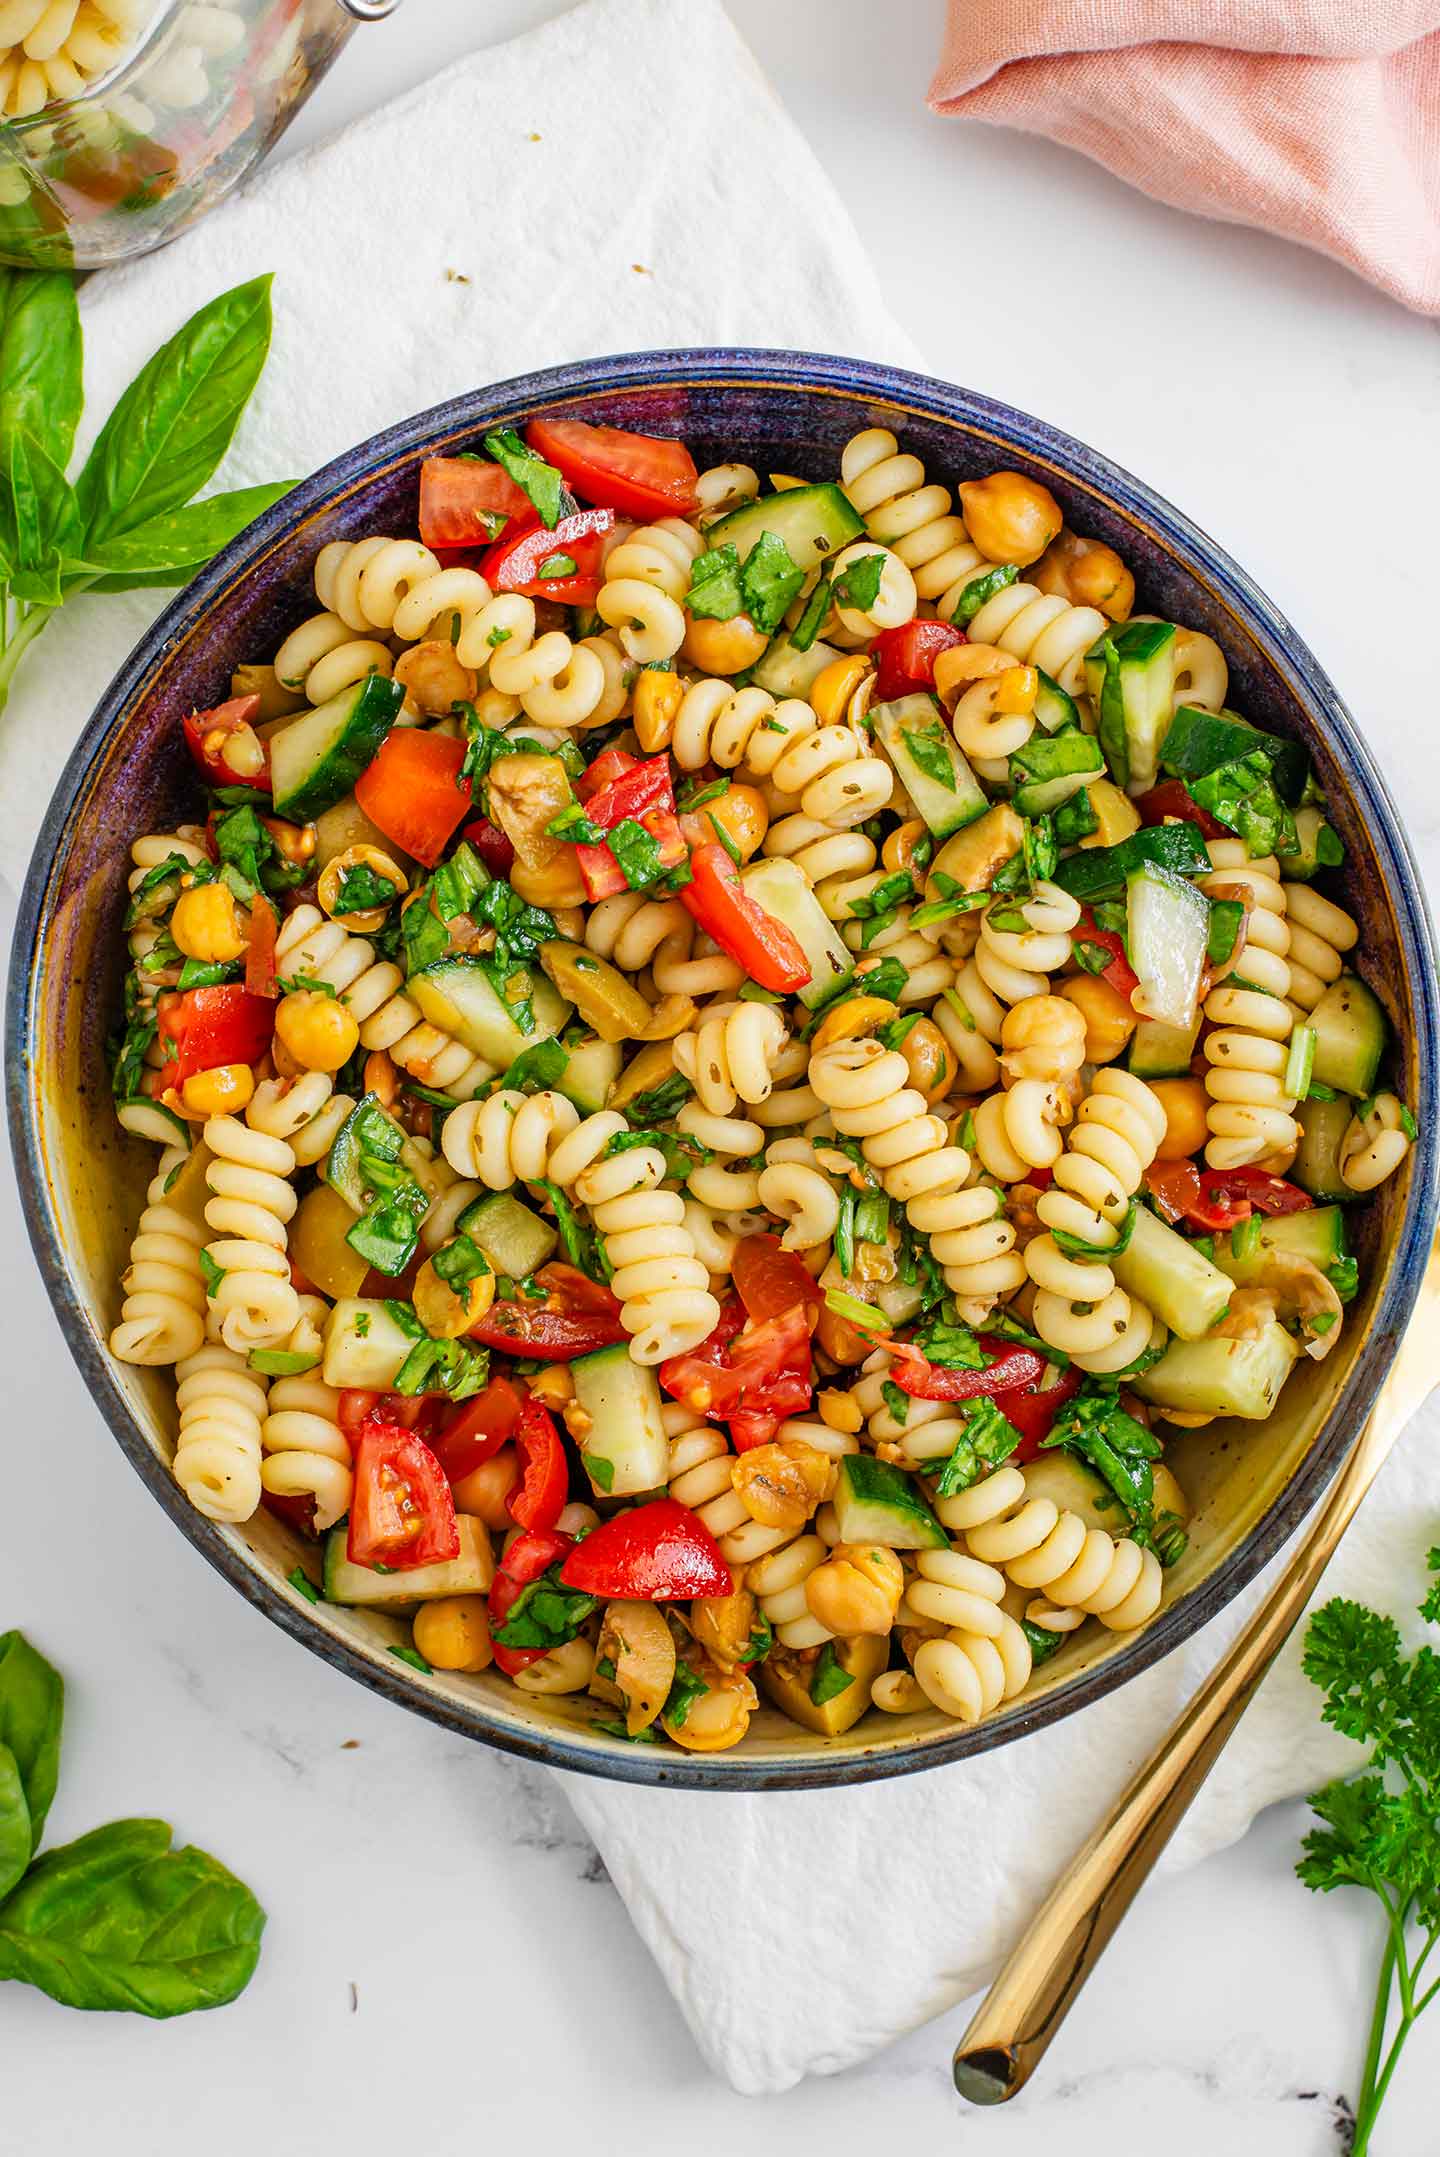 Top down view of a vegan pasta salad in a bowl. Chopped tomatoes, cucumbers, olives, spinach, and herbs are mixed with fusilli noodles and chickpeas.